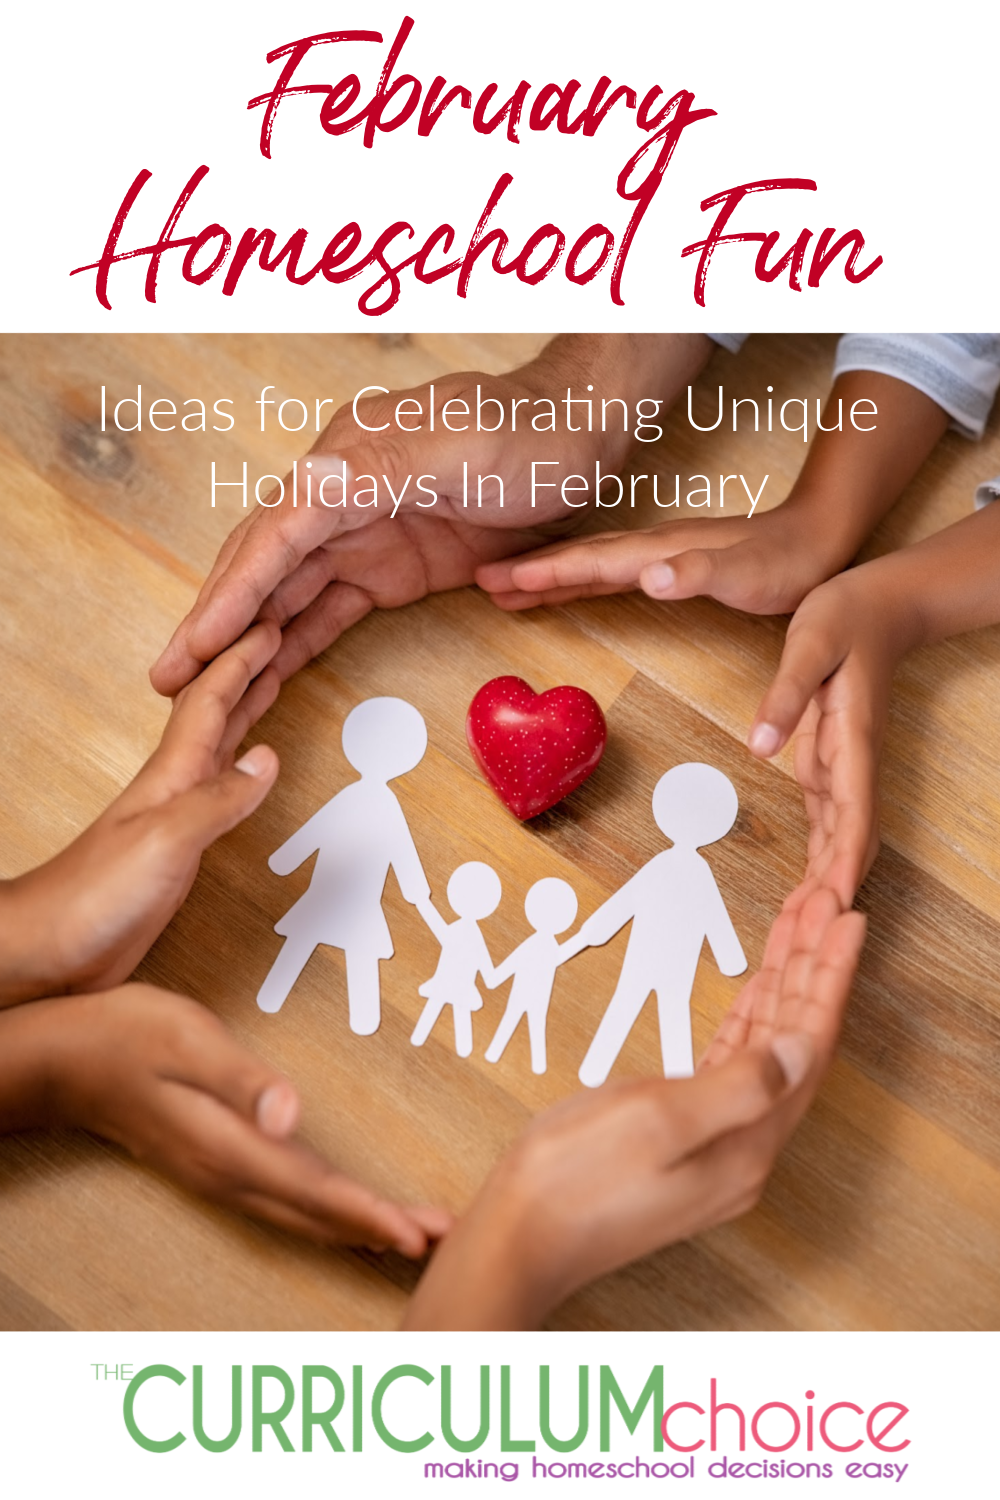 Make heartwarming memories during the cool days of February with some of the wacky, but real, holiday ideas below or create unique ones that are just right for your family. Share the love all month long with these February homeschool fun ideas.